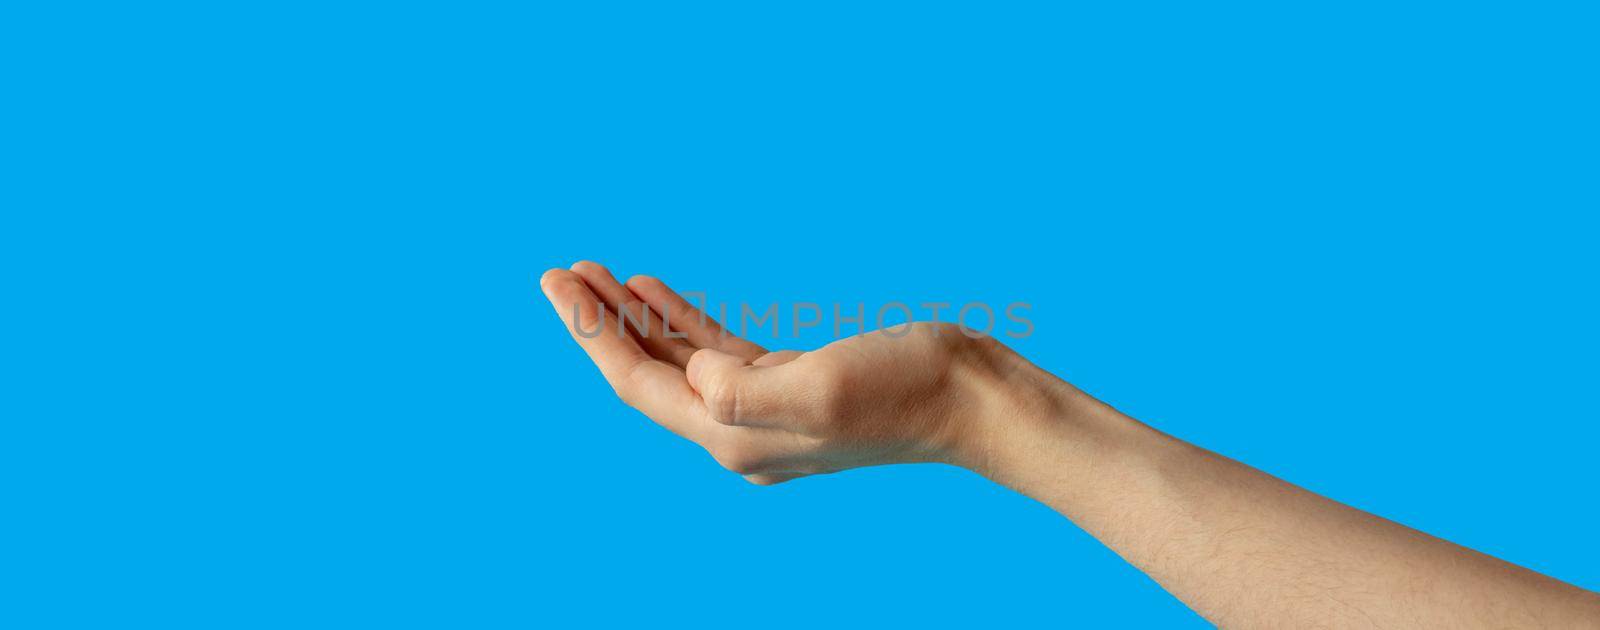 The hand is extended palm up.The hand is open and ready to help or accept. A gesture highlighted on a blue background. by lapushka62